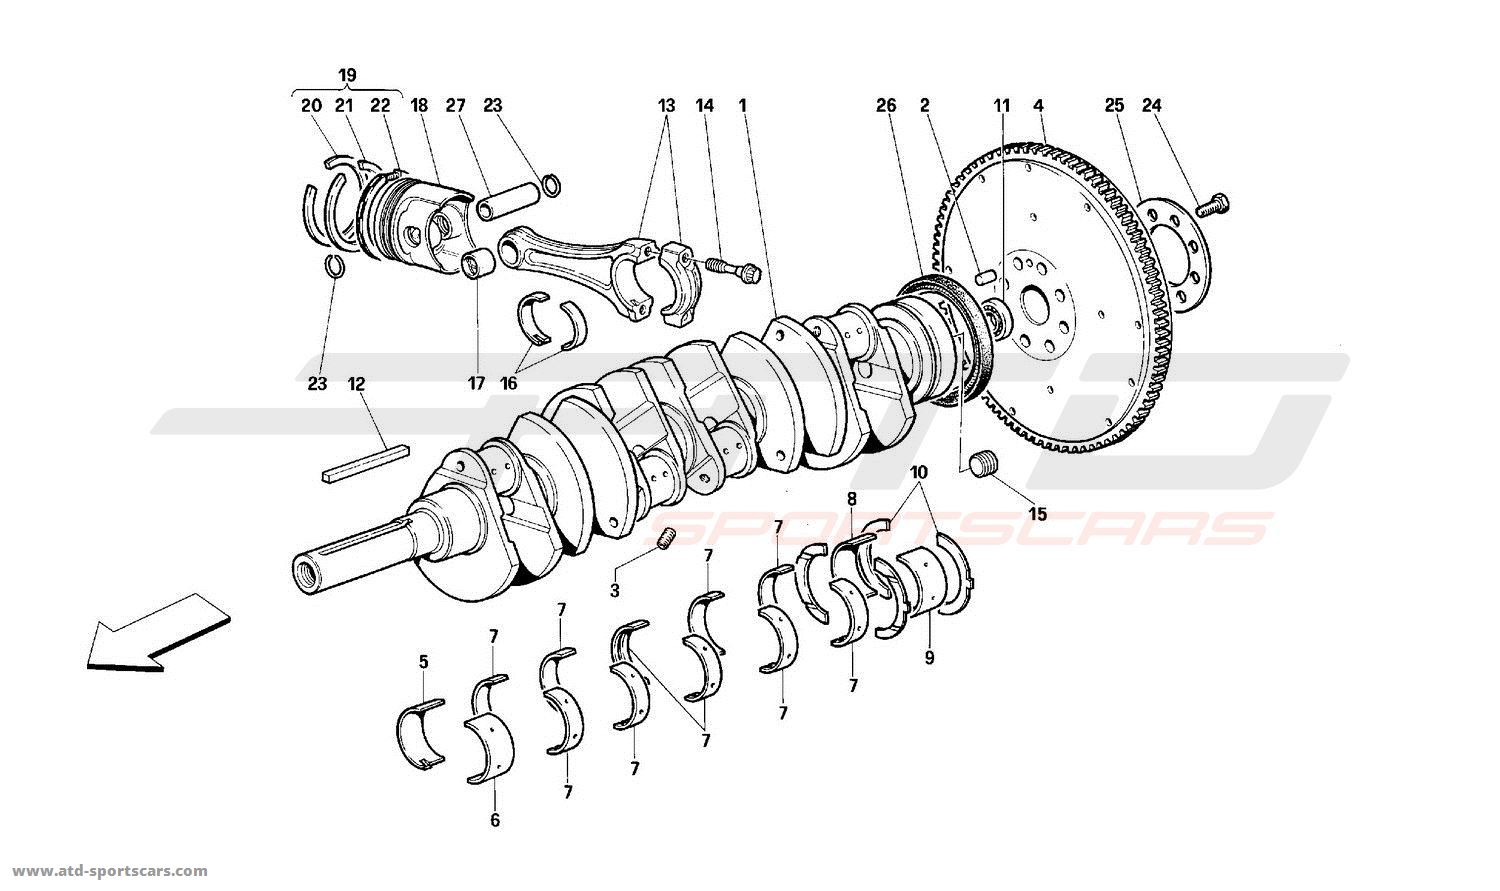 CRANKSHAFT - CONNECTING RODS AND PISTONS